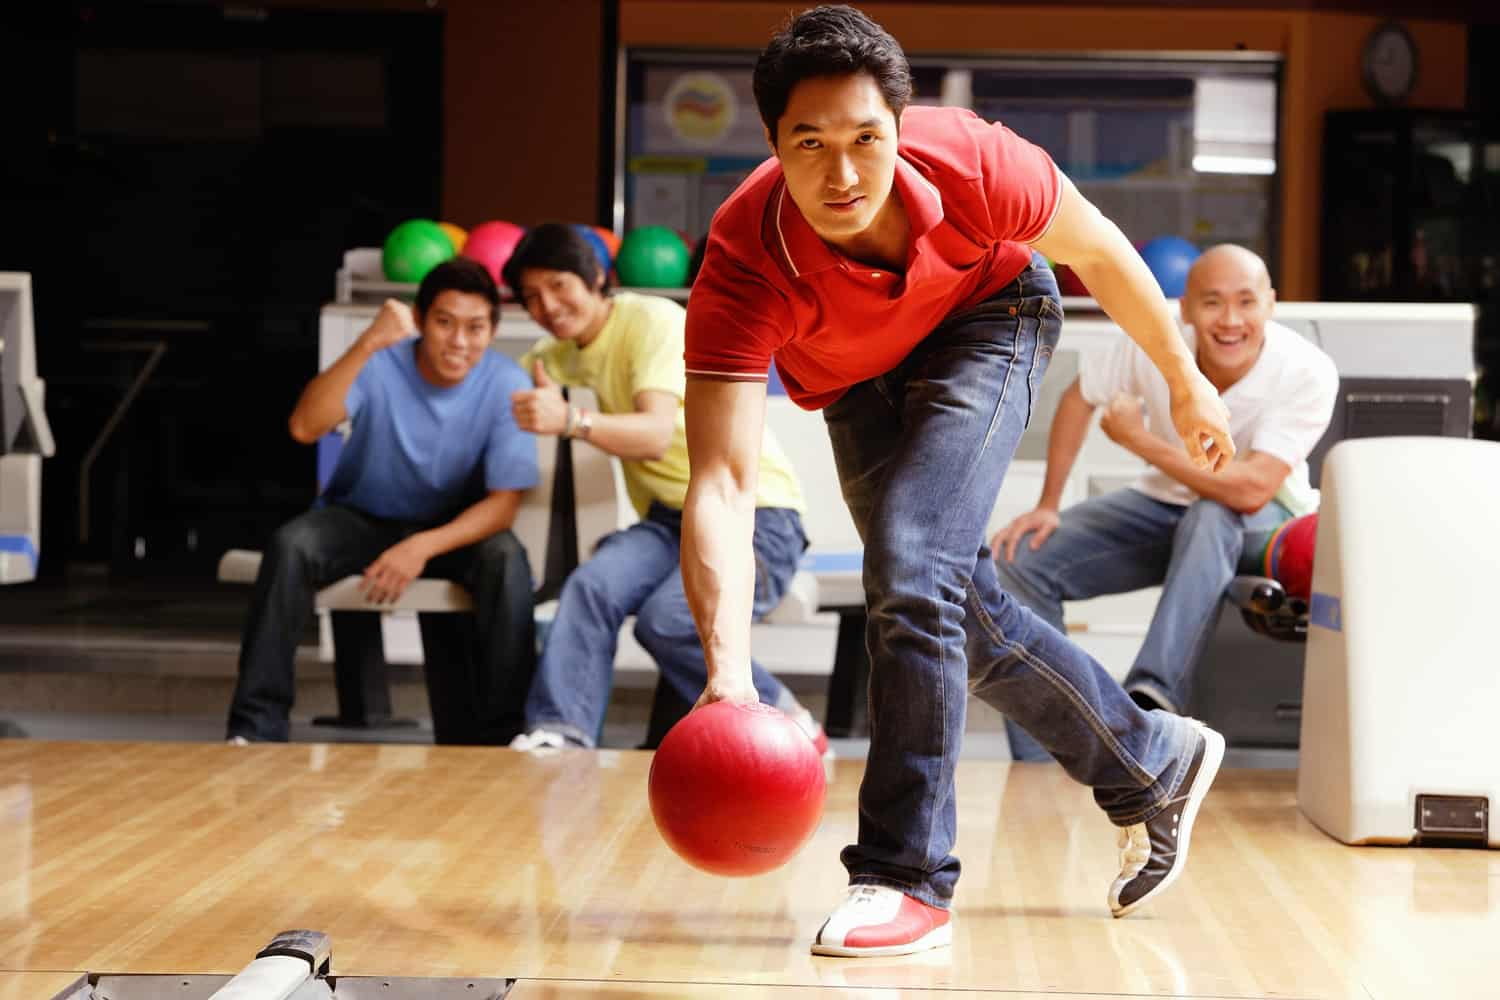 Man bowling, friends cheering in the background